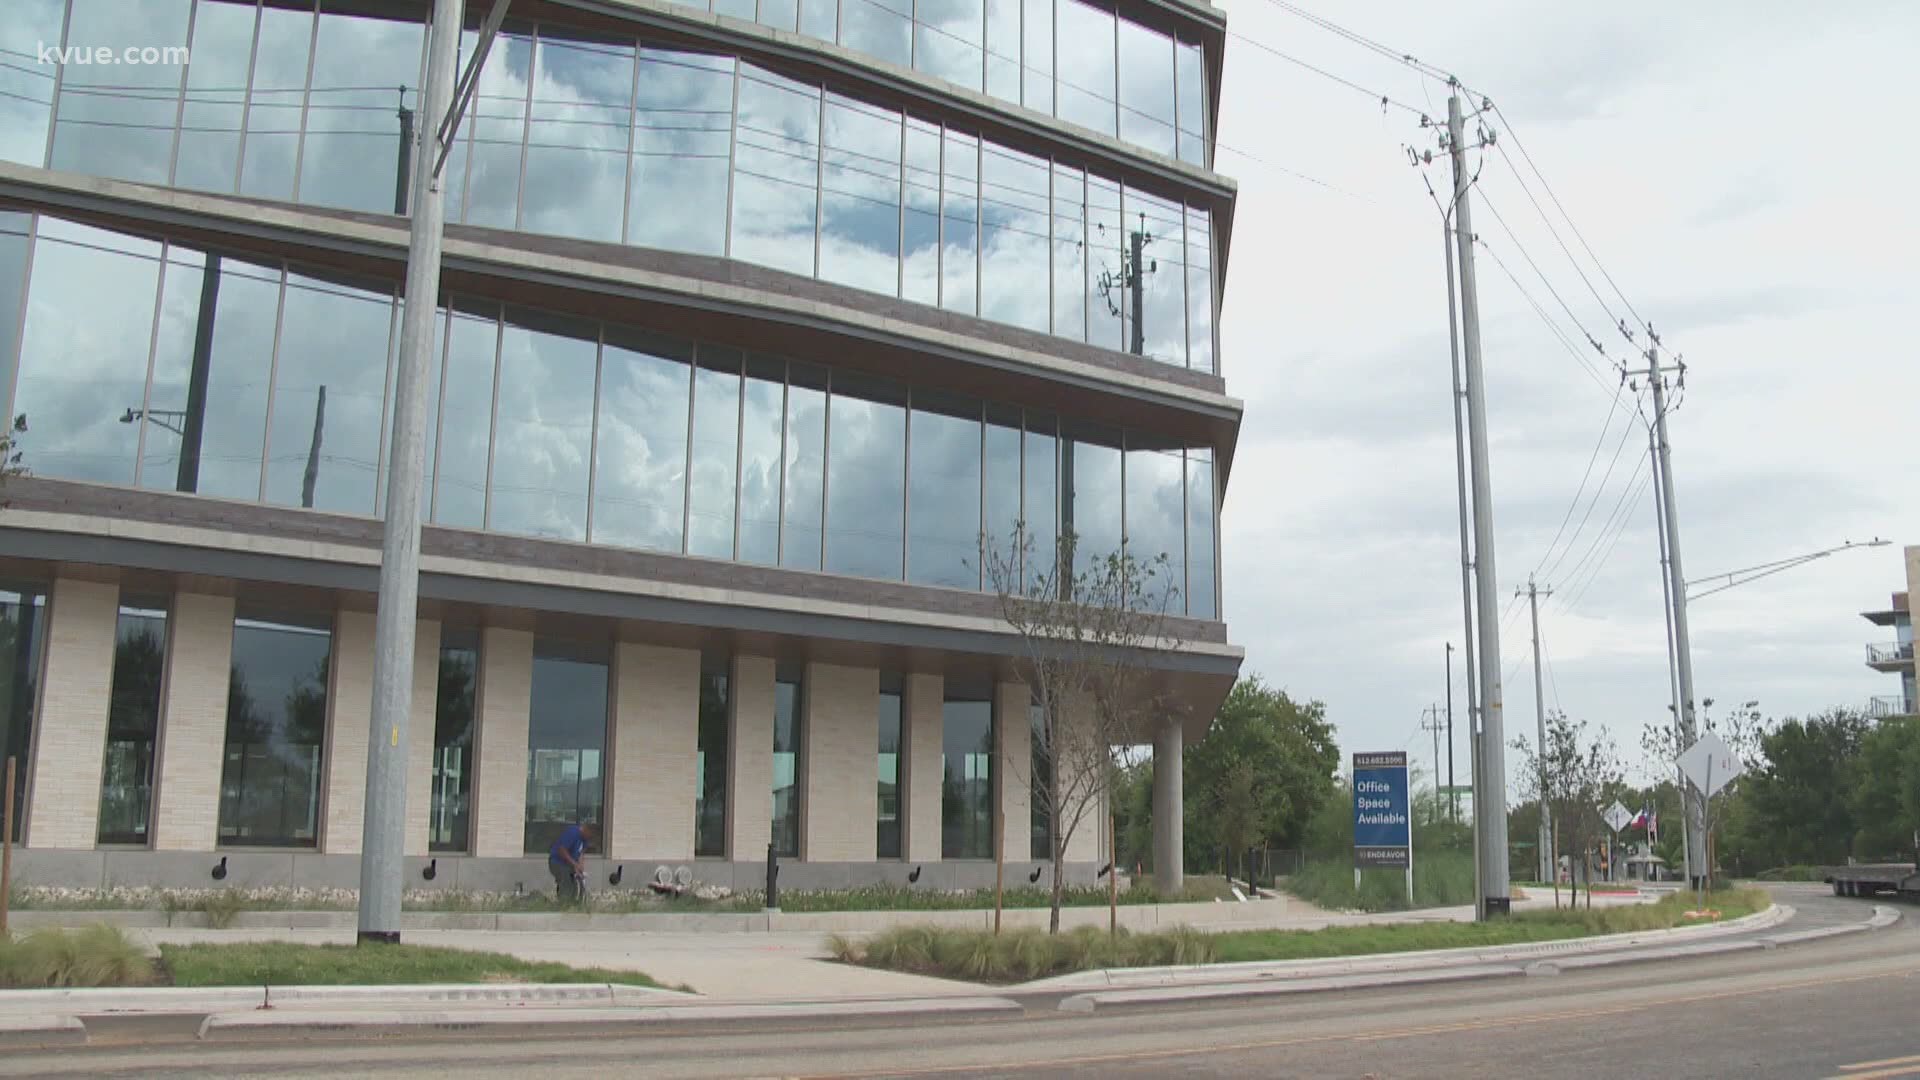 An e-commerce giant has signed one of the biggest office leases in the Austin area this year.